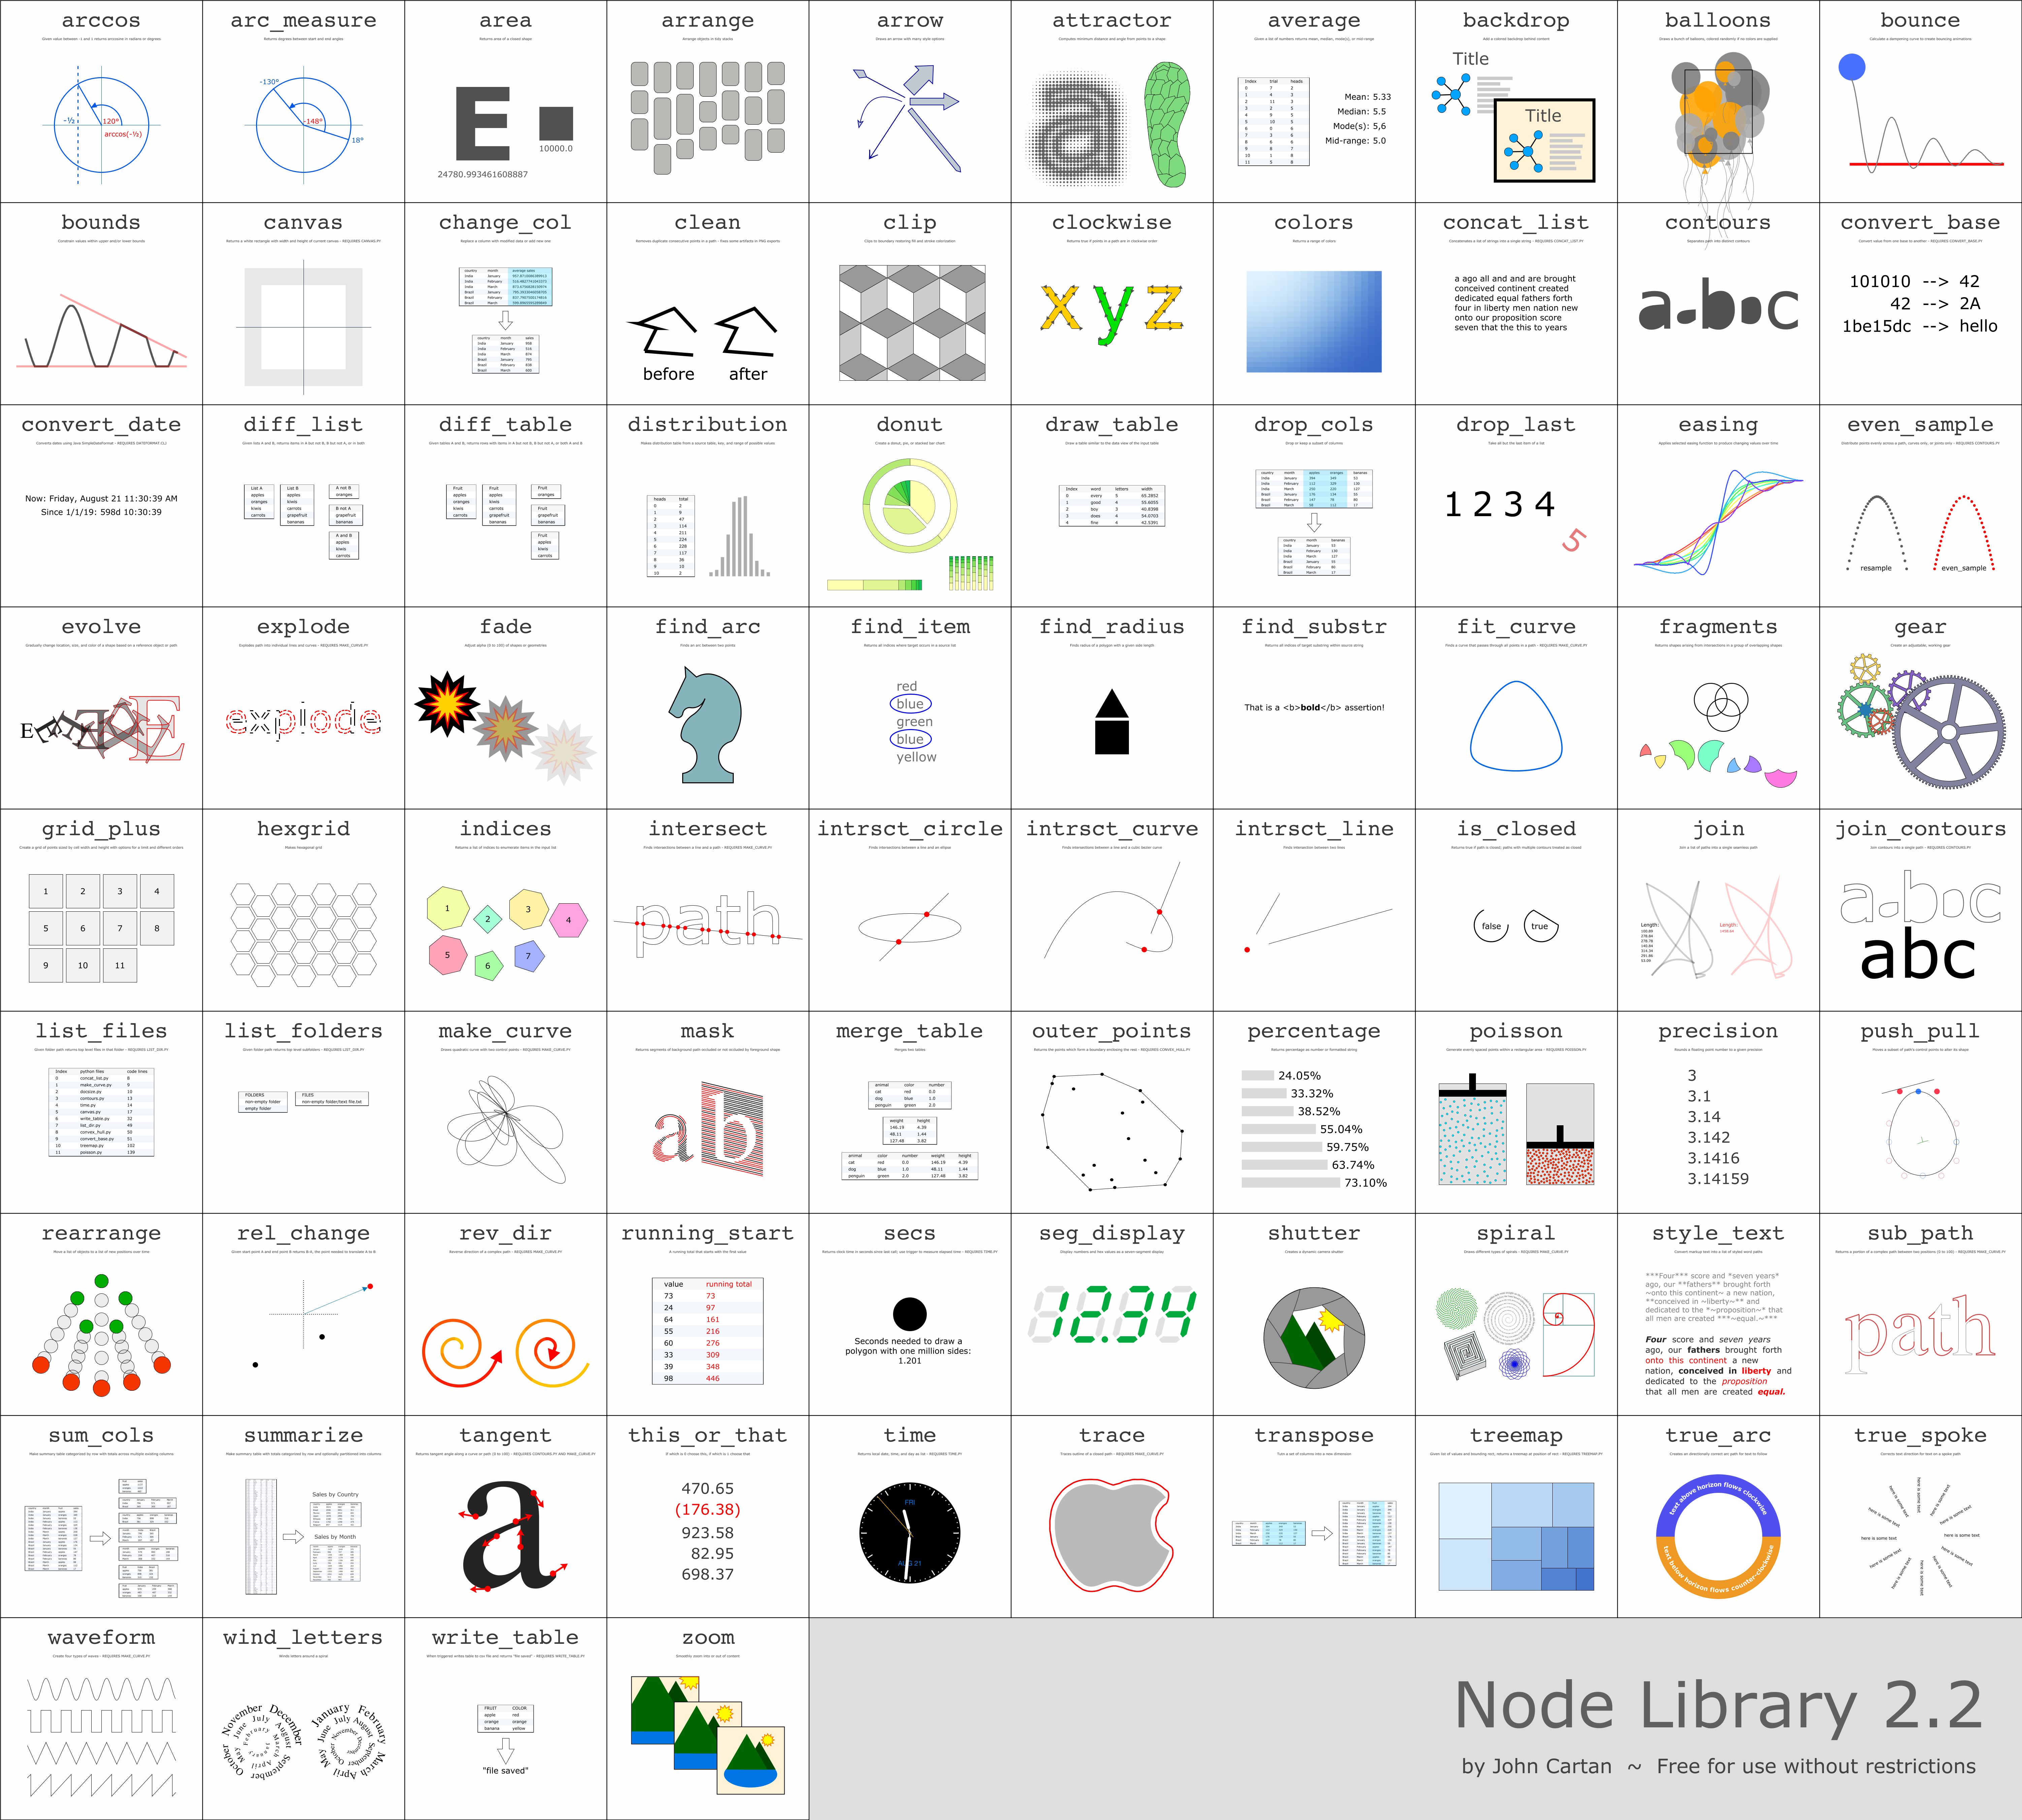 Node_library_2.2_poster